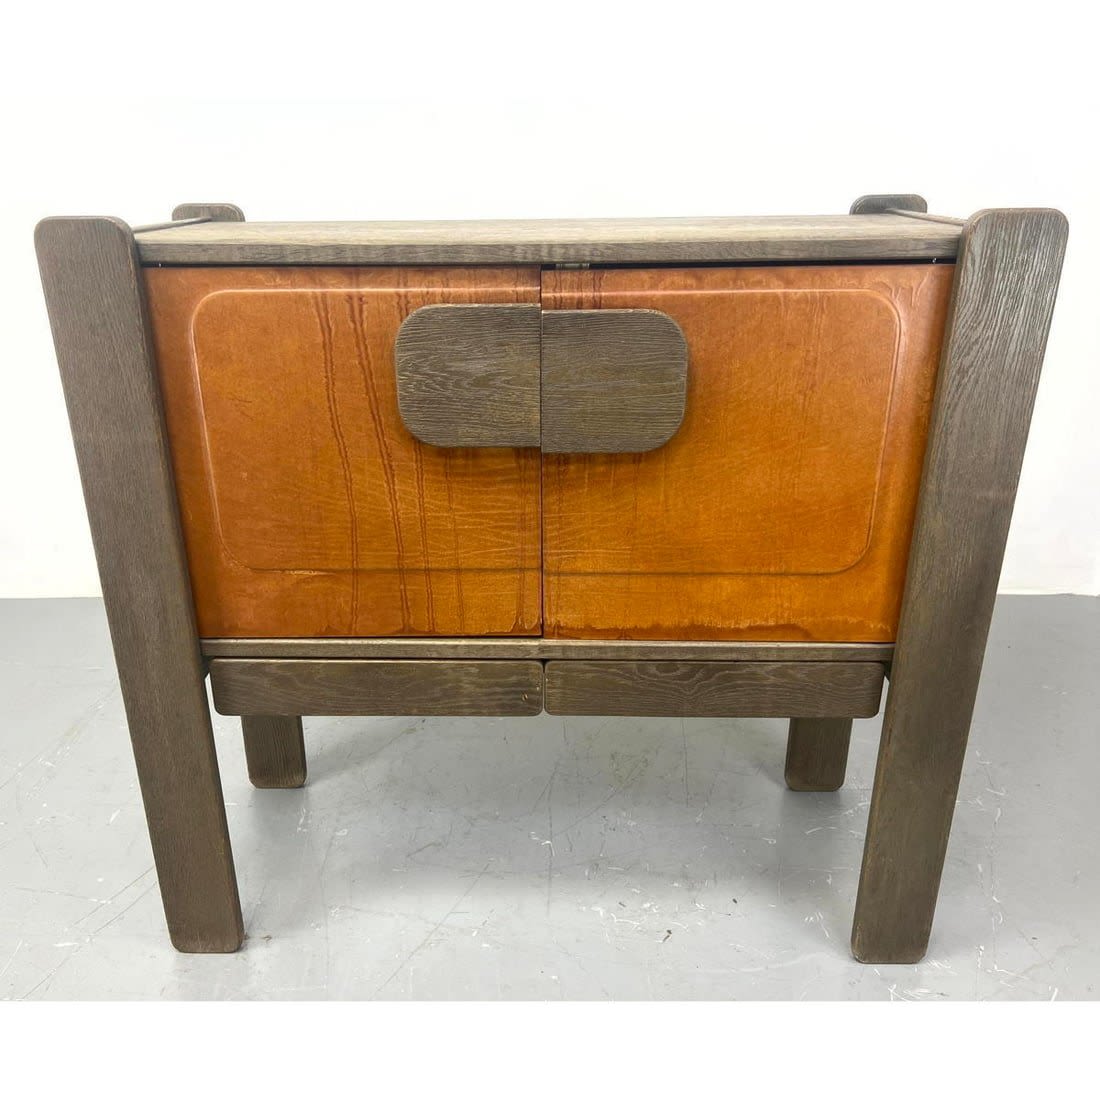 1970s Belgiun oak and leather cabinet.